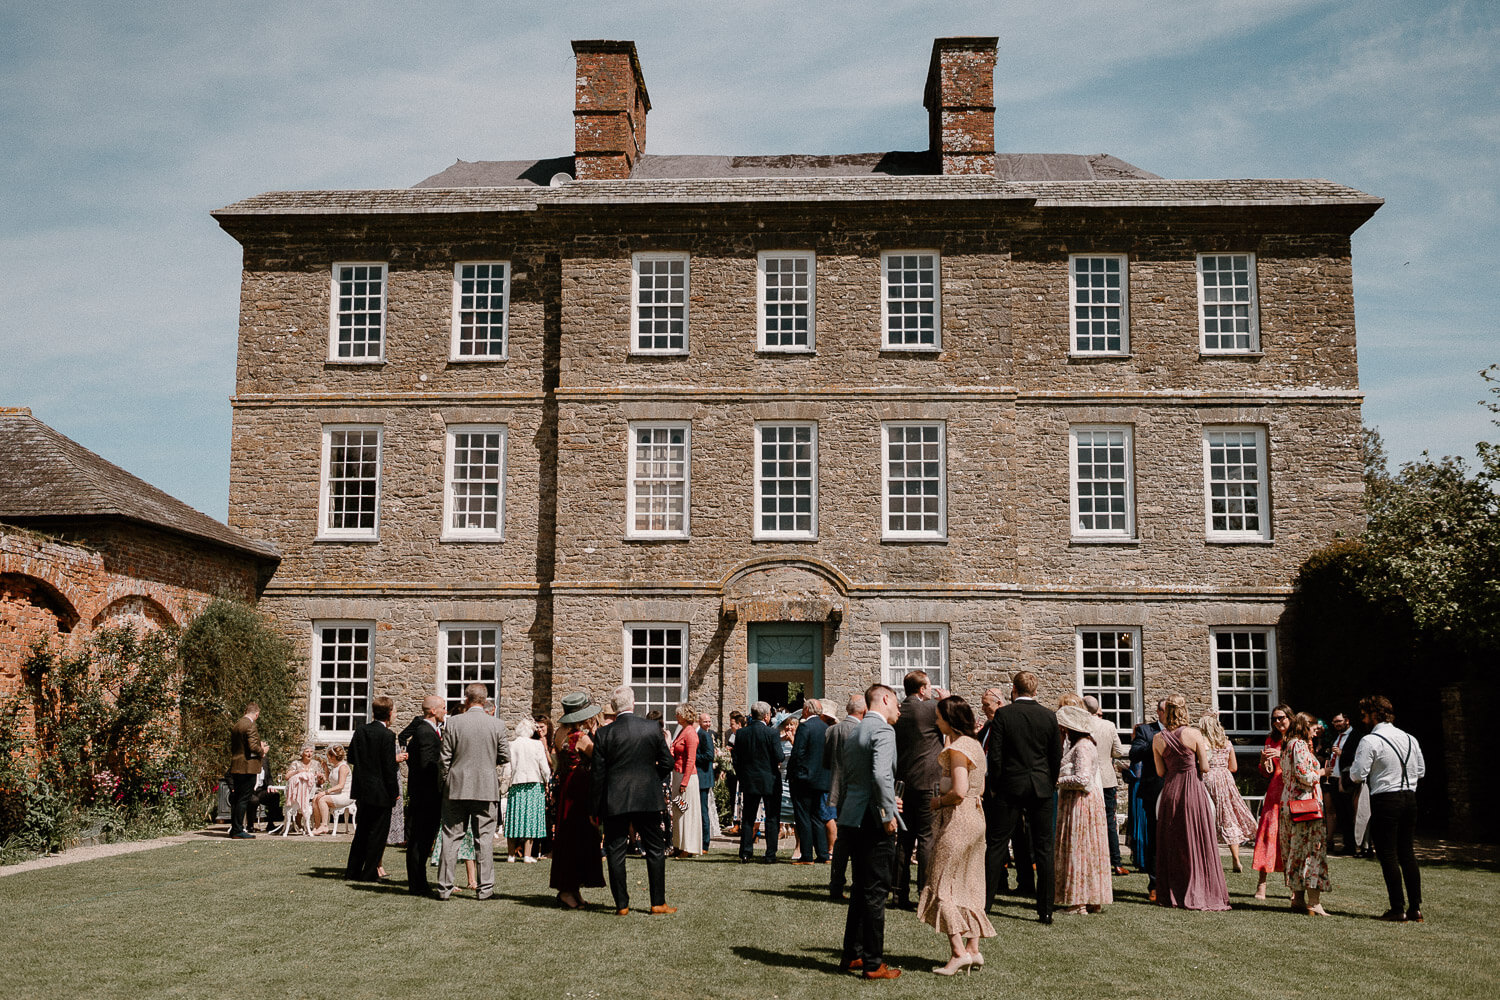 Wide angle view of Kingston Estate country house from the walled garden where guests mingle.